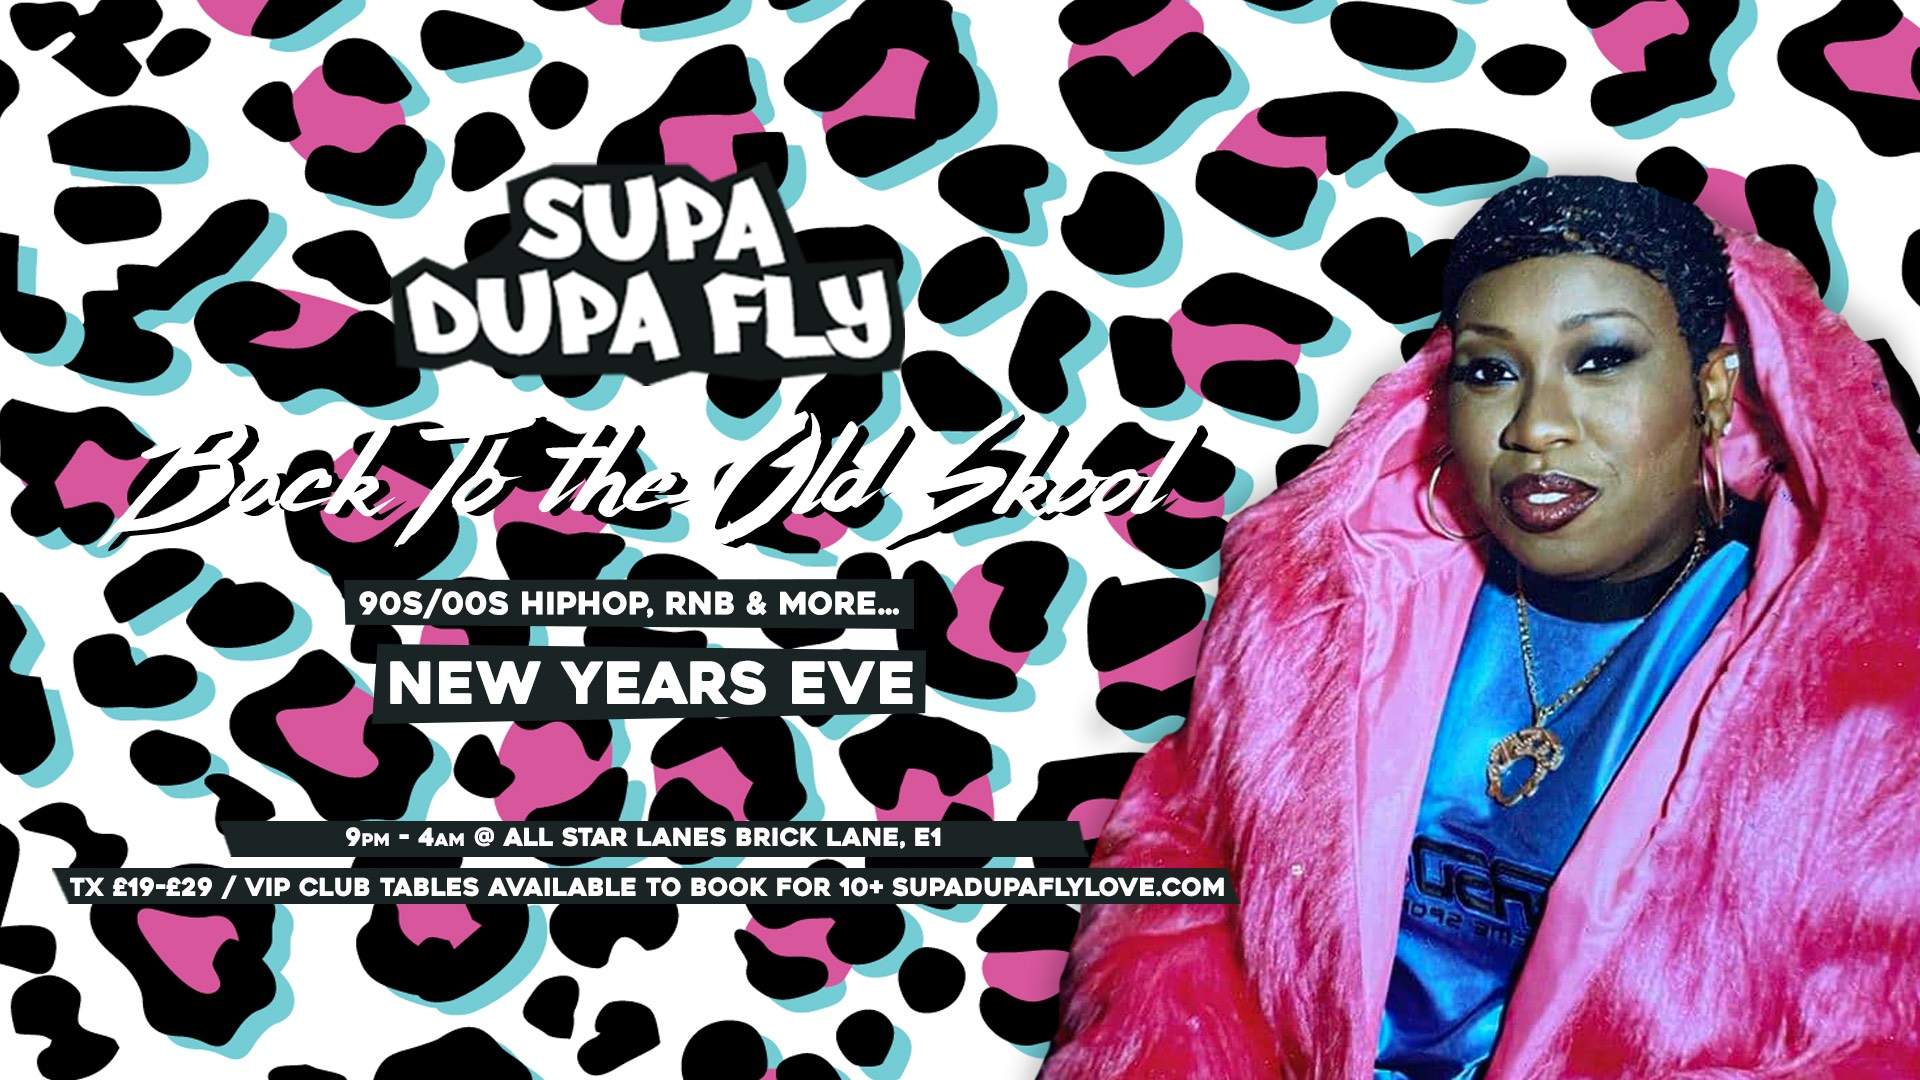 Supa Dupa Fly x Back To The Old Skool New Years Eve - Página frontal